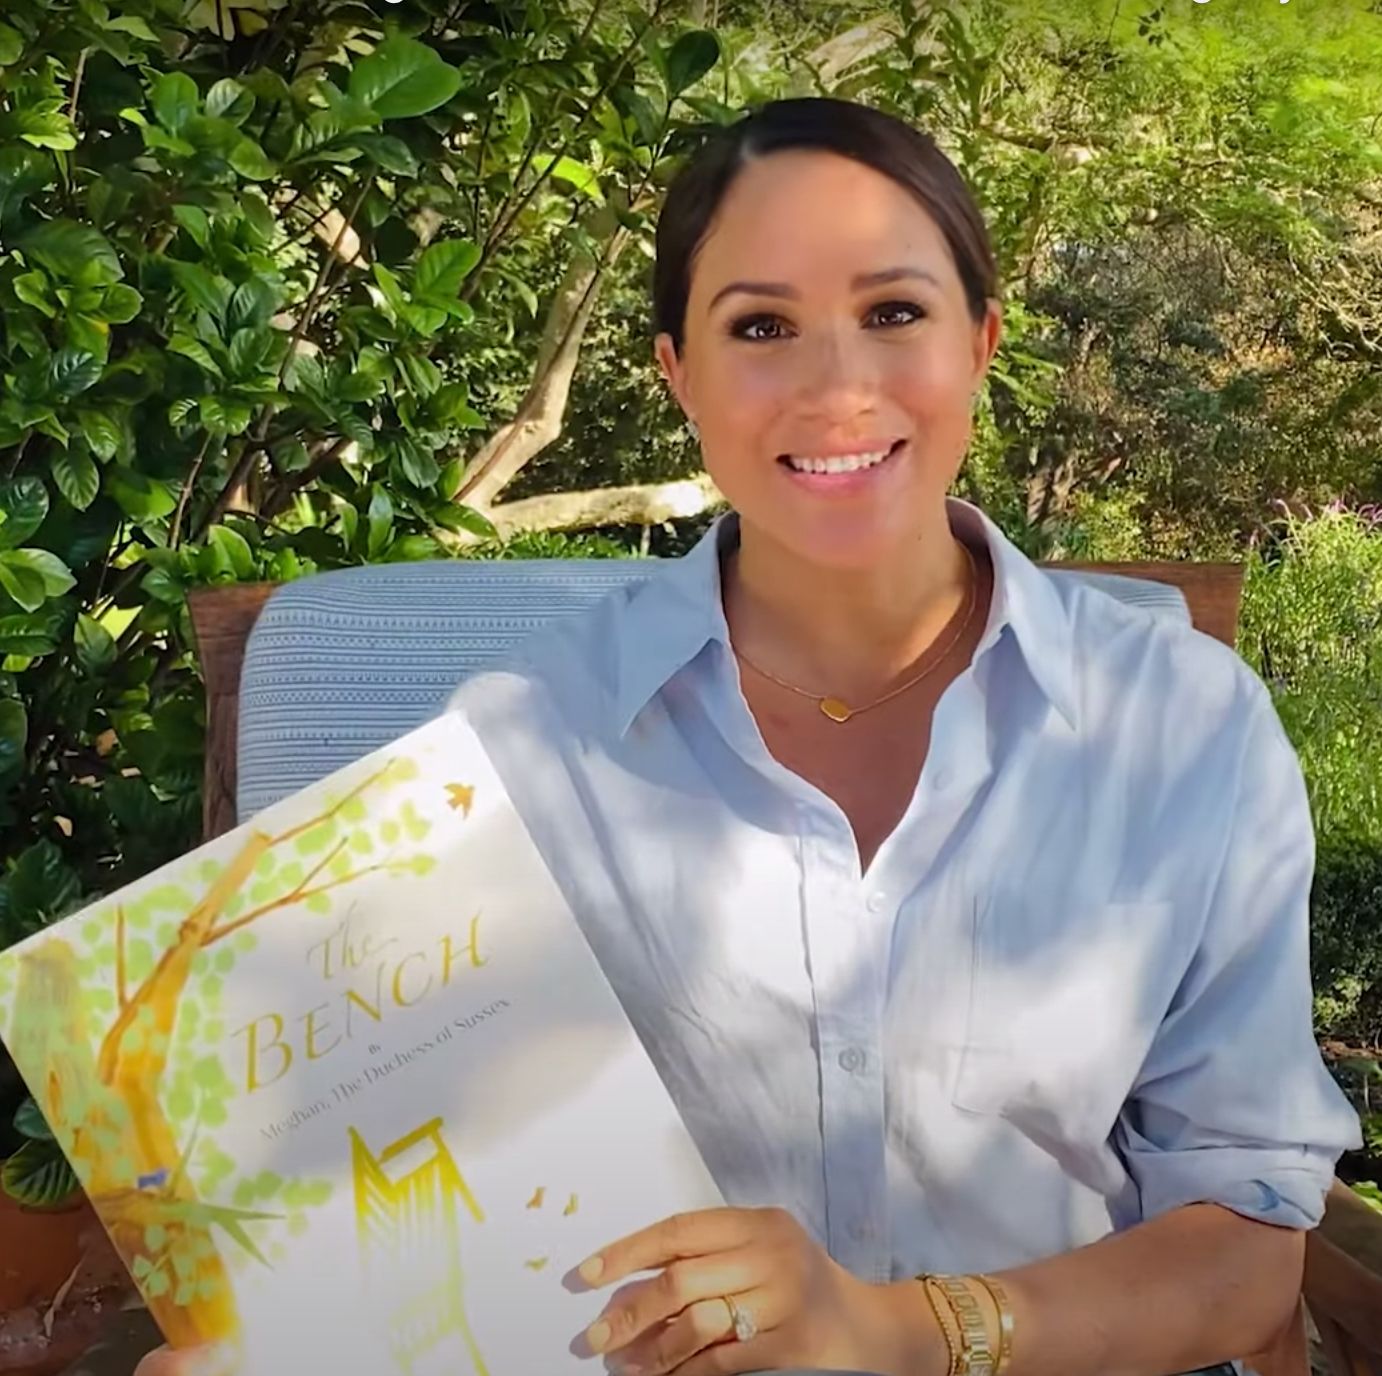 Watch Meghan Markle Read Her Children's Book <I>The Bench</I>